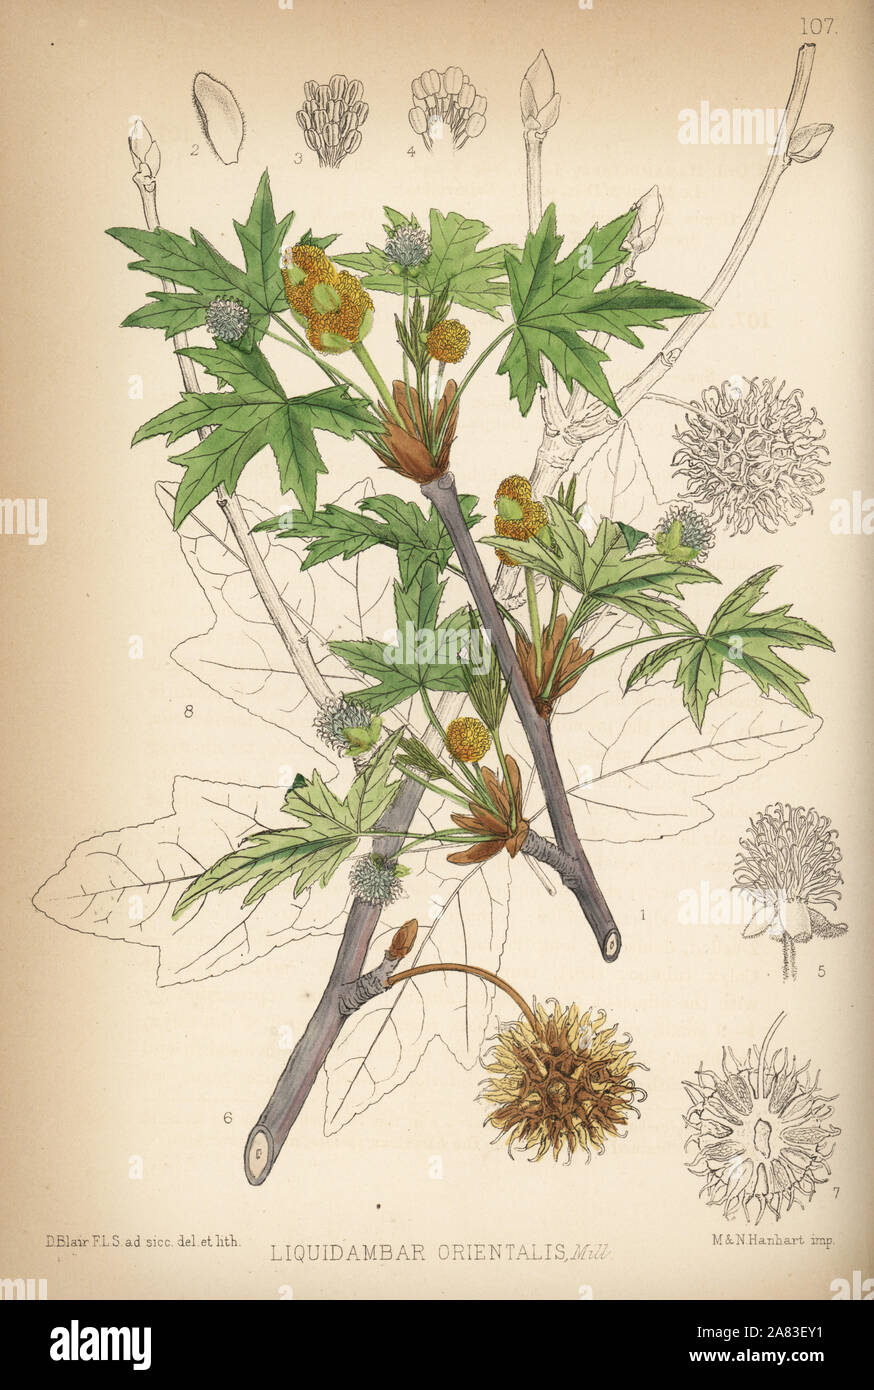 Oriental sweetgum or Turkish sweetgum, Liquidambar orientalis. Handcoloured lithograph by Hanhart after a botanical illustration by David Blair from Robert Bentley and Henry Trimen's Medicinal Plants, London, 1880. Stock Photo